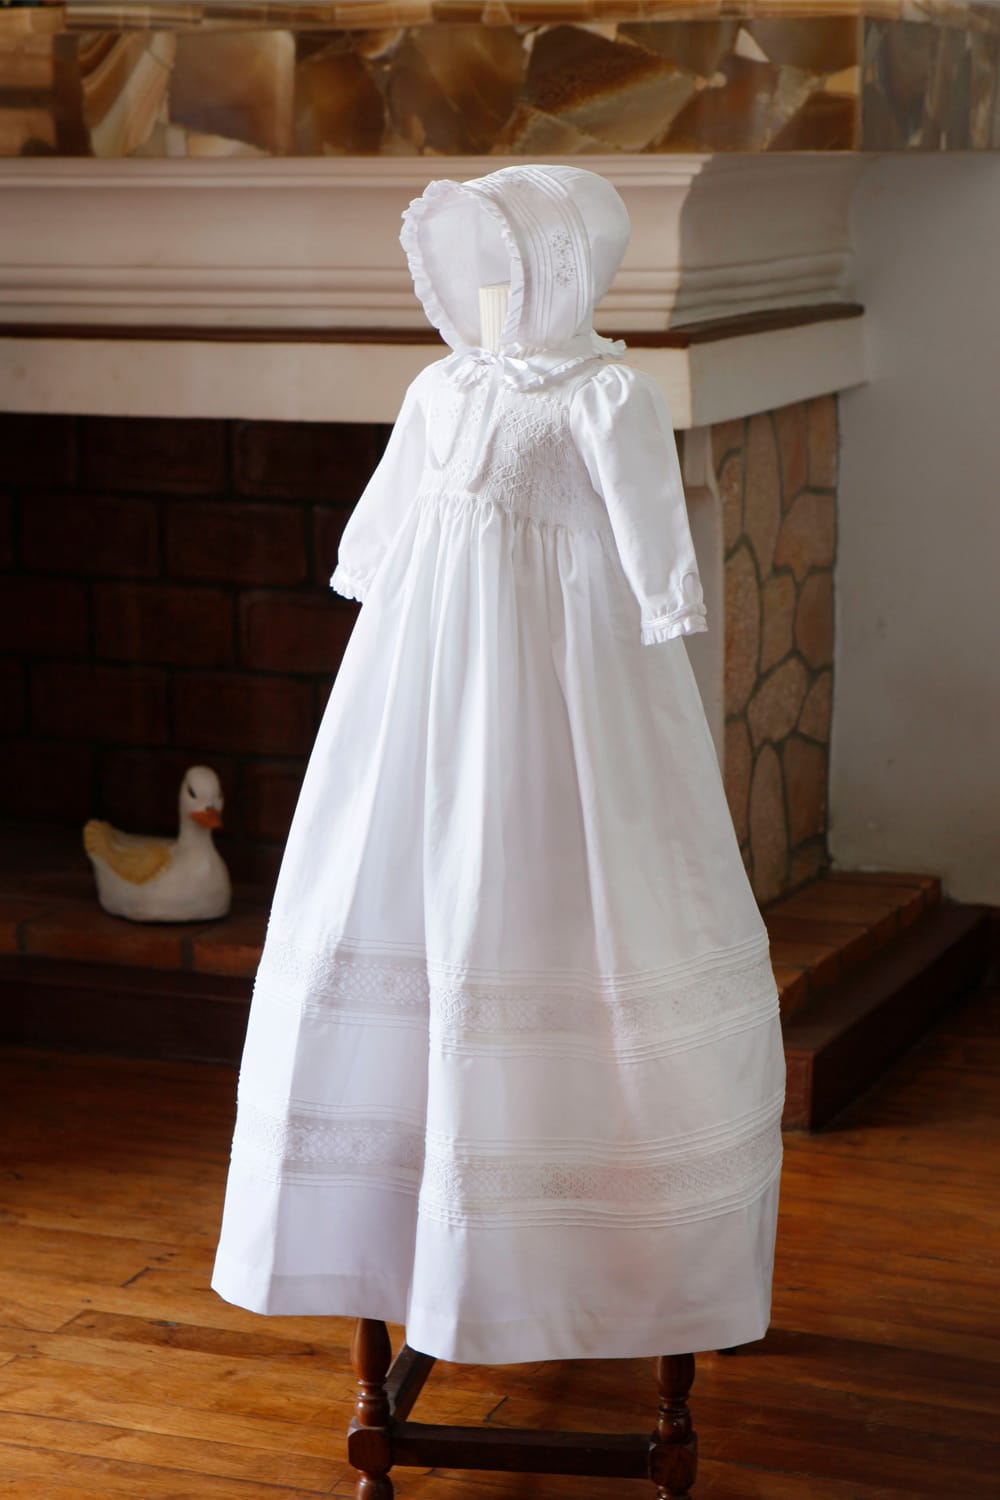 RCIN 250499 - The Royal Christening Gown (replica)